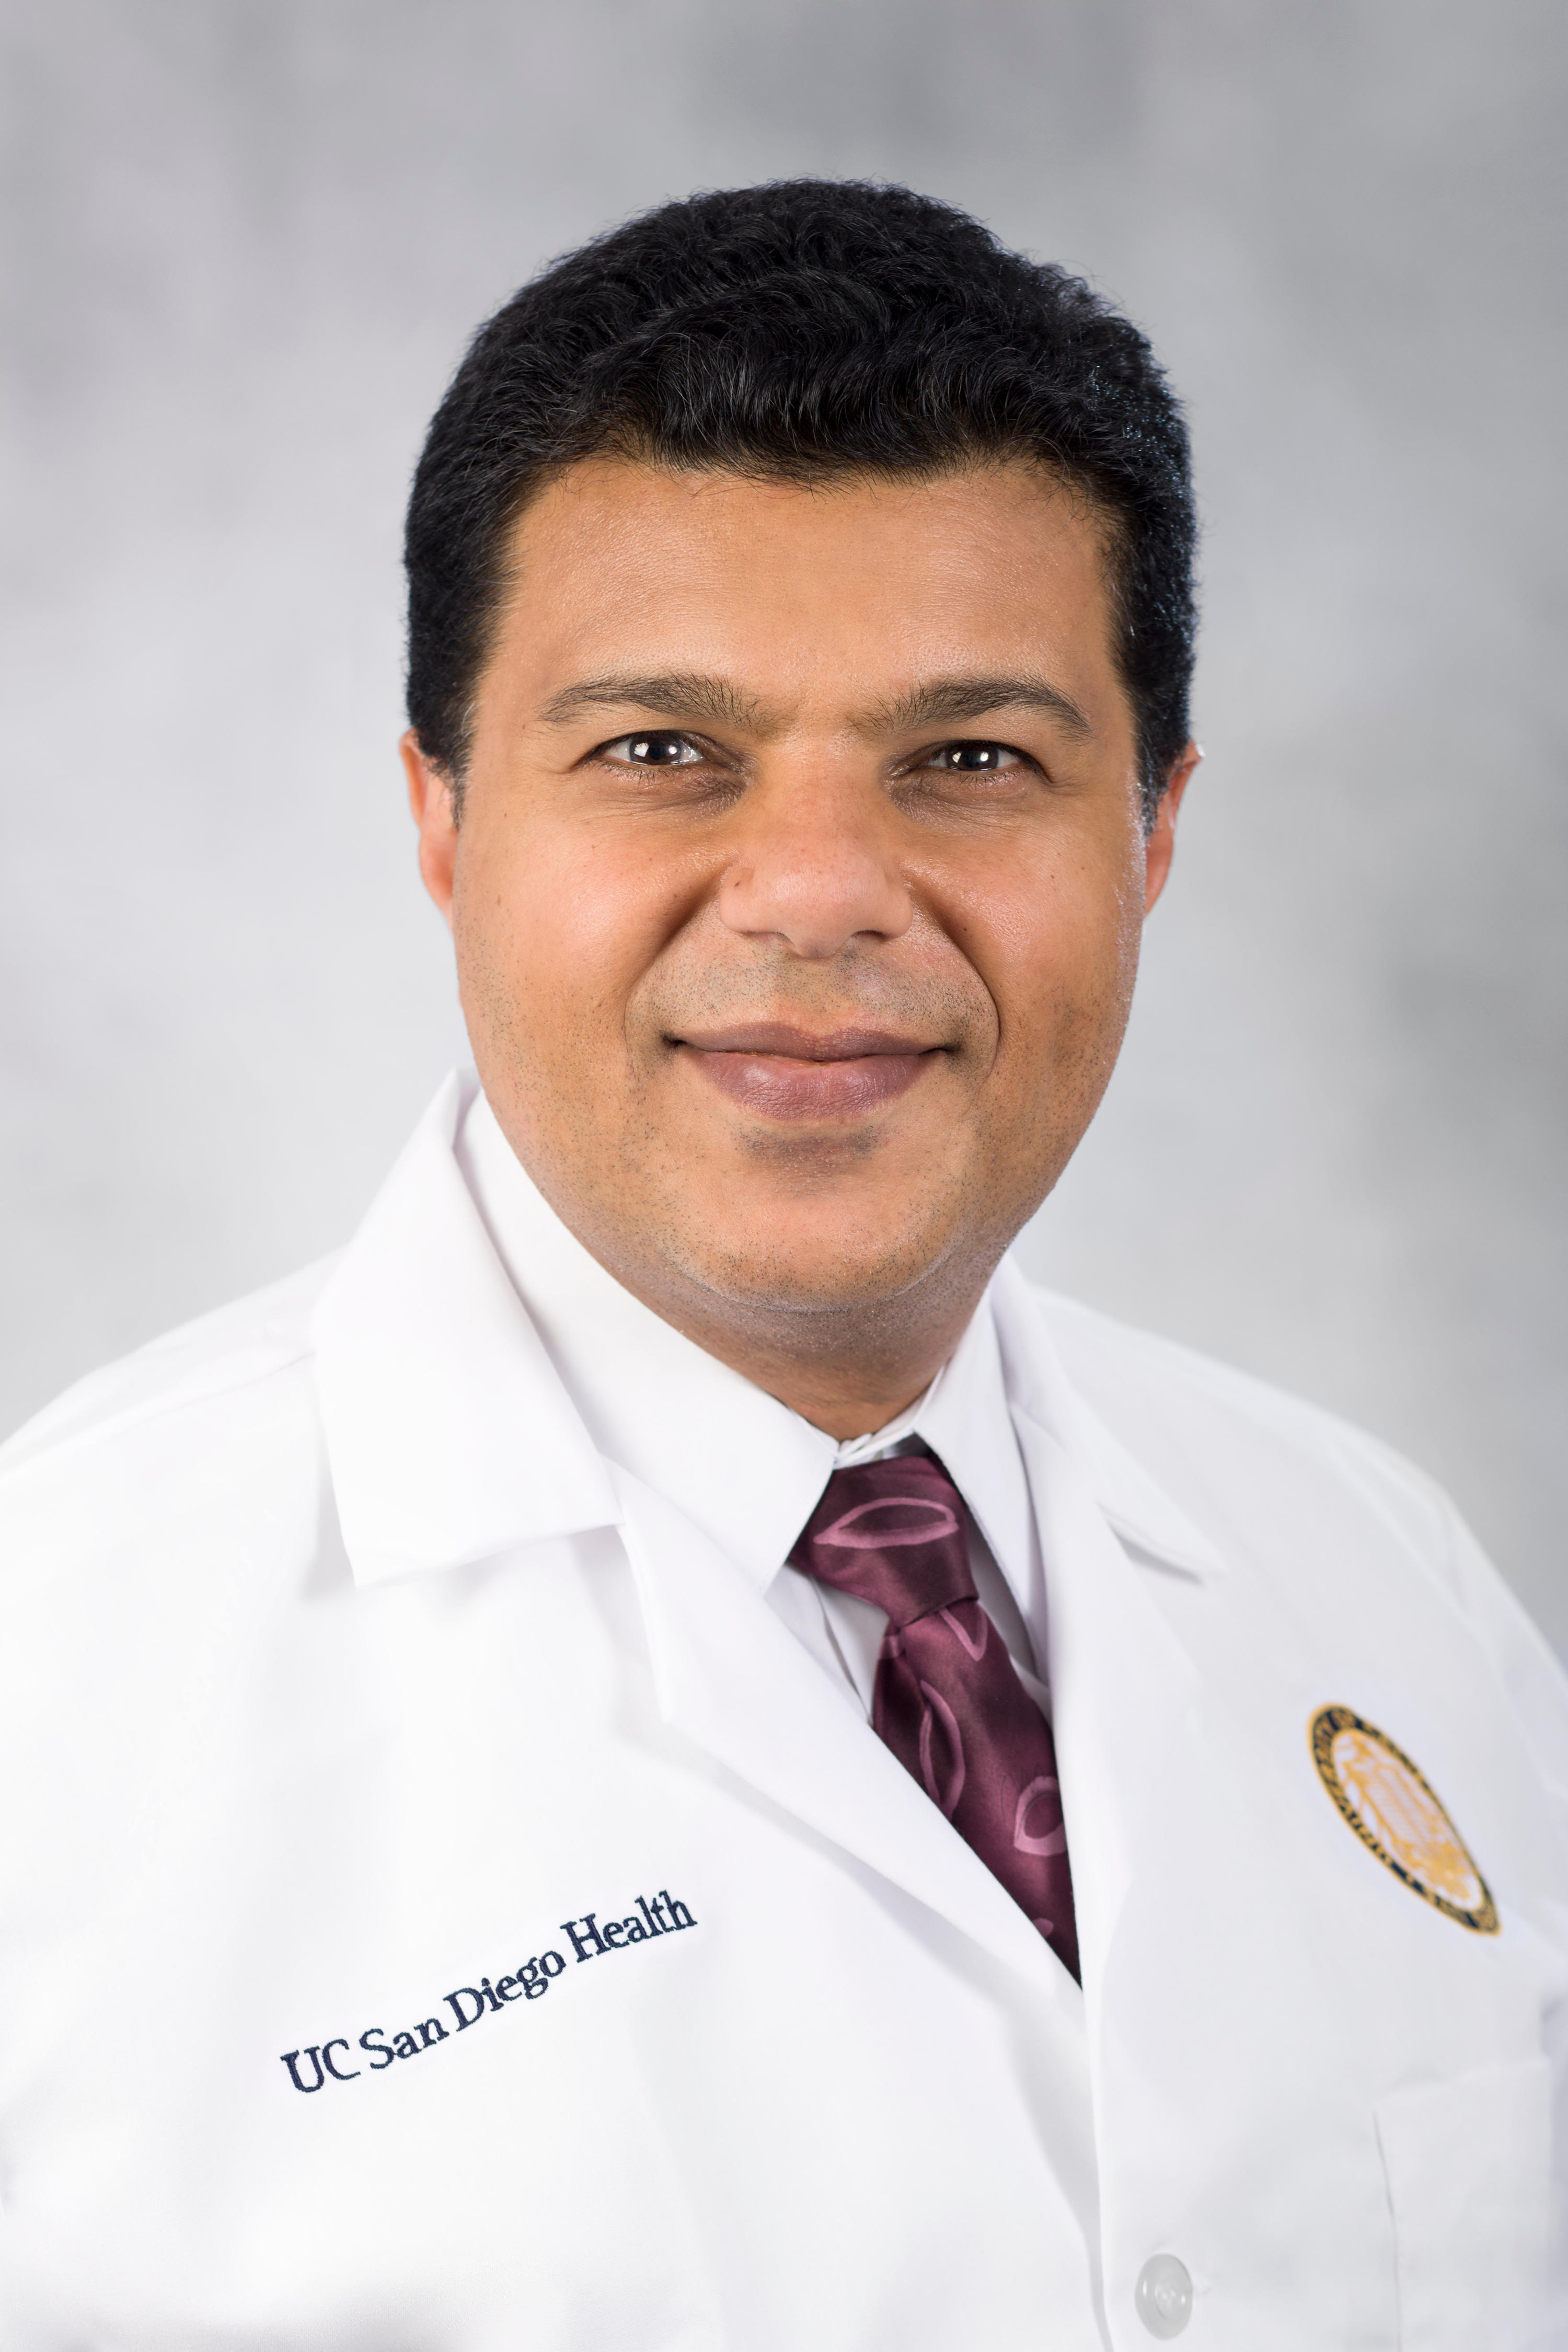 Dr. Ahmed S. Suliman, MD - San Diego, CA - Plastic Surgeon, General Surgeon